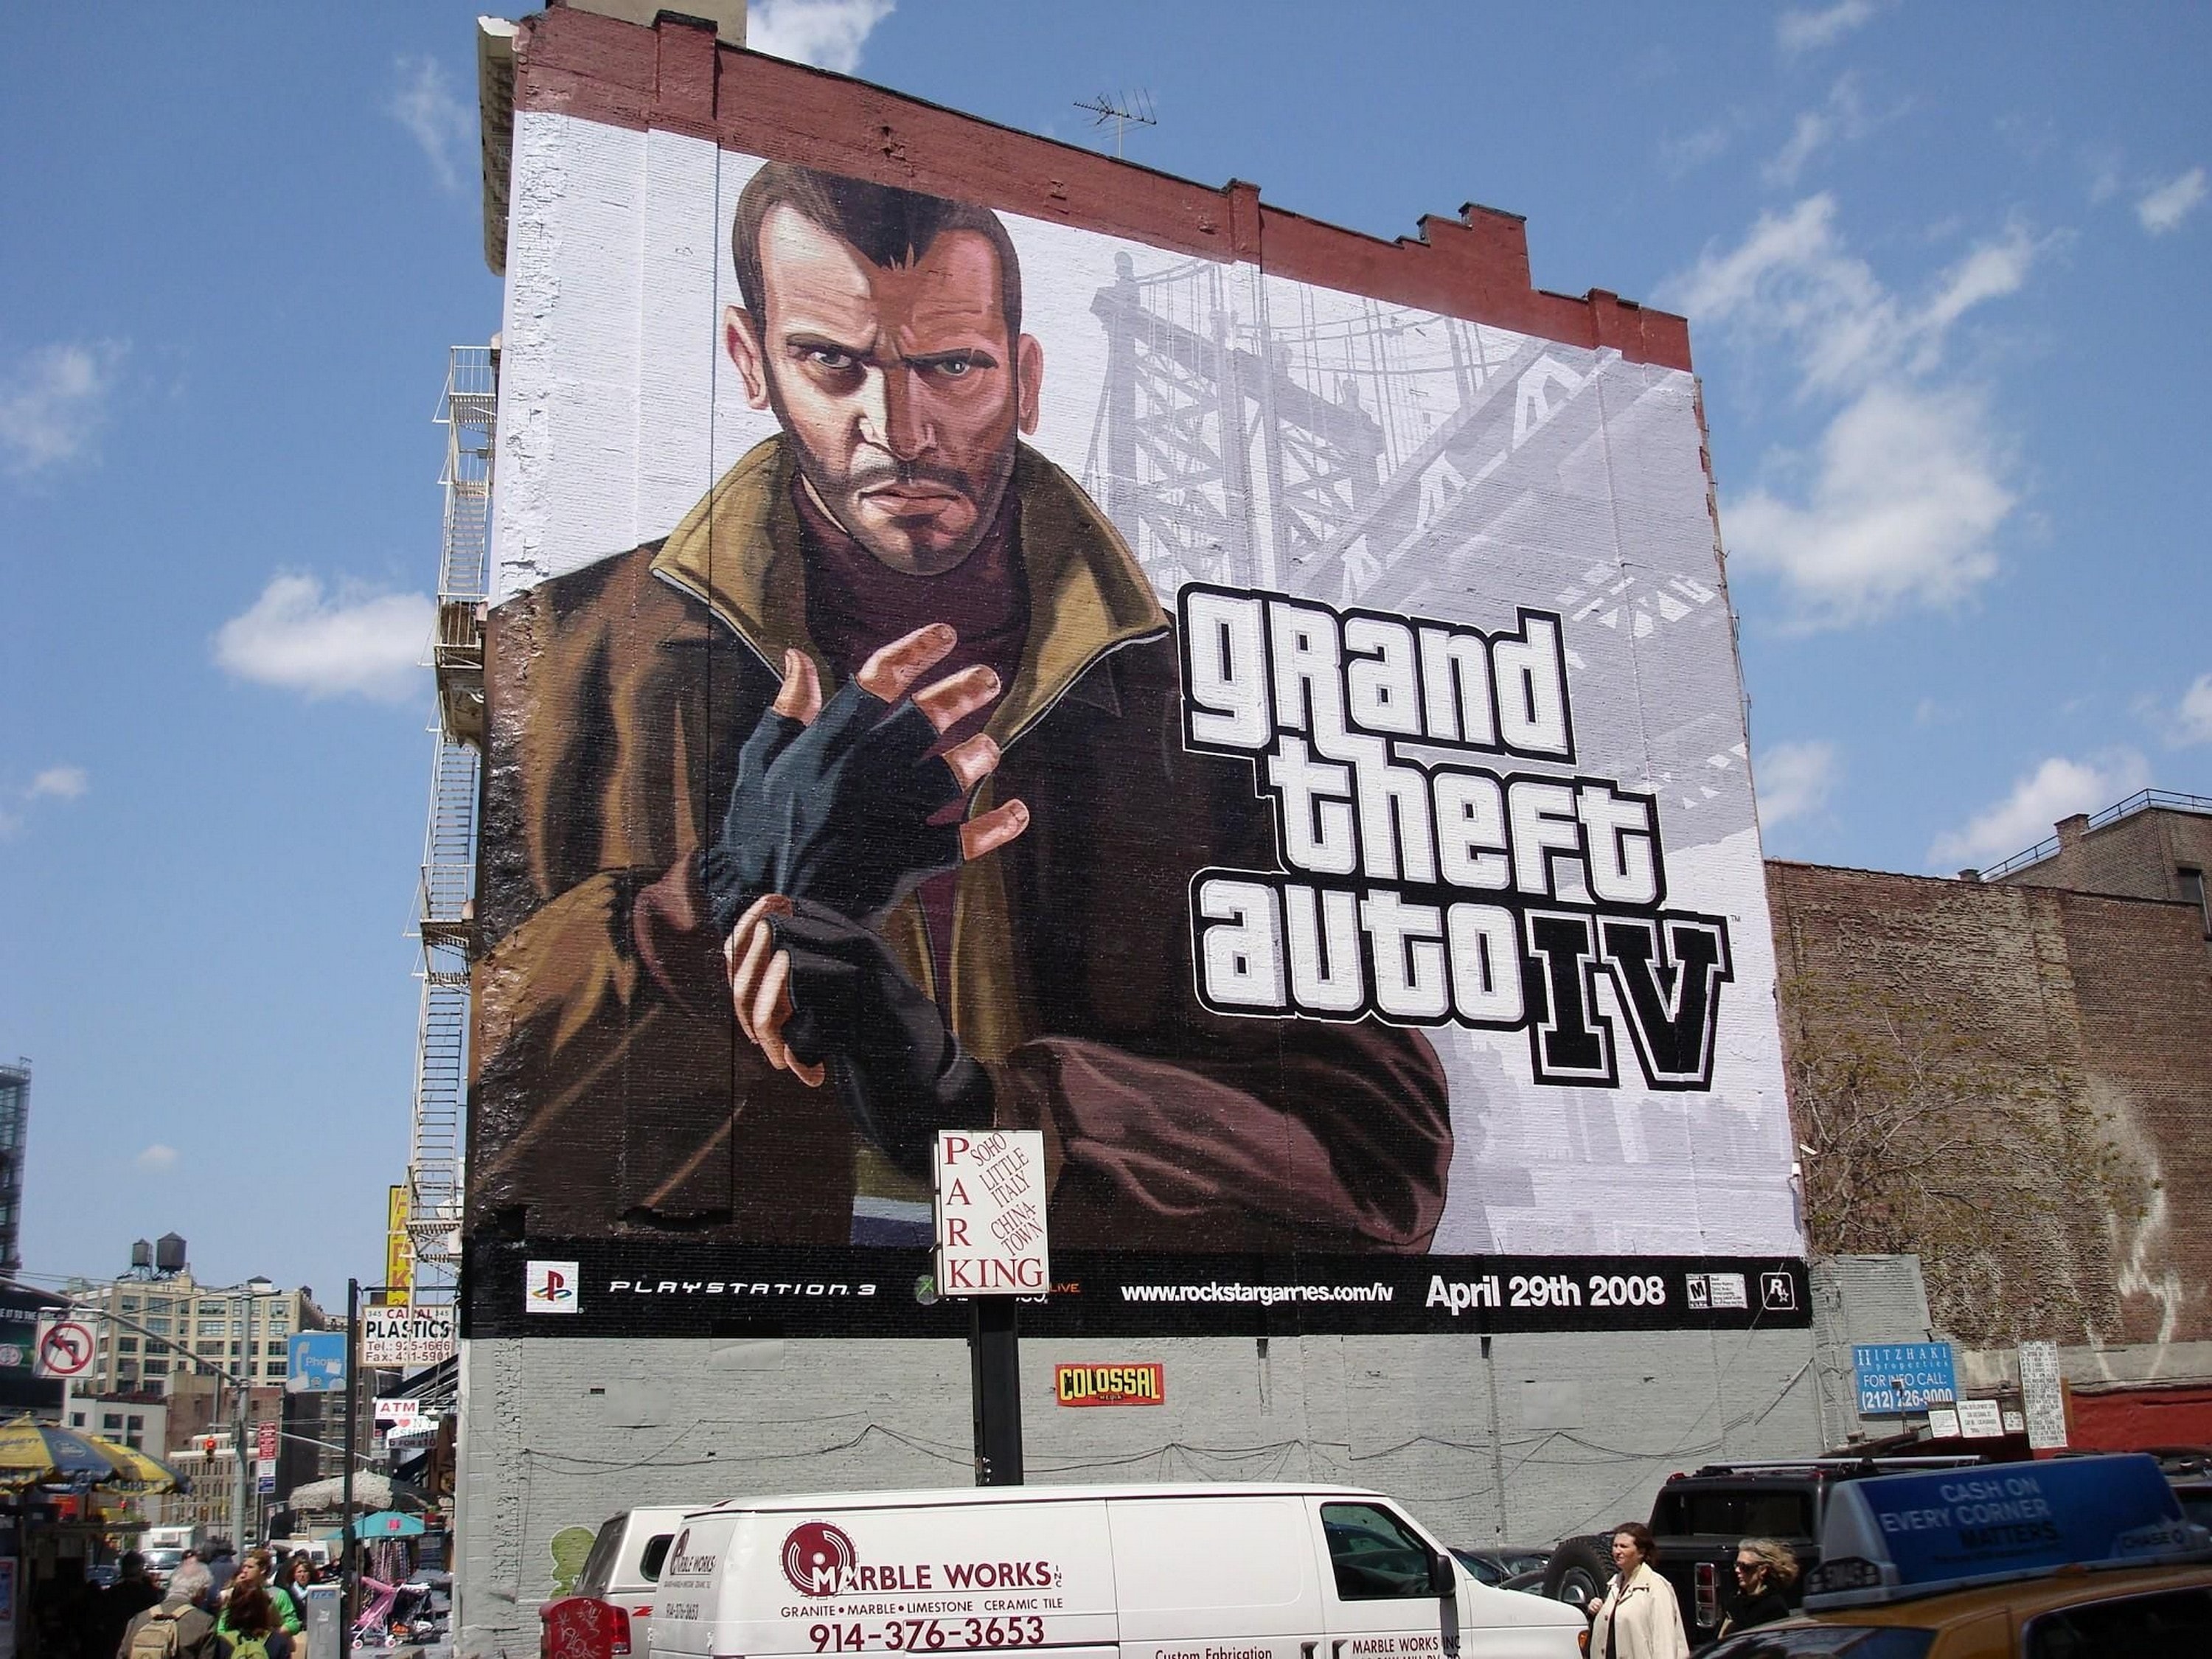 This Is Why GTA 6 Could Be One of the Most Visually Advanced Games Ever  Created - autoevolution